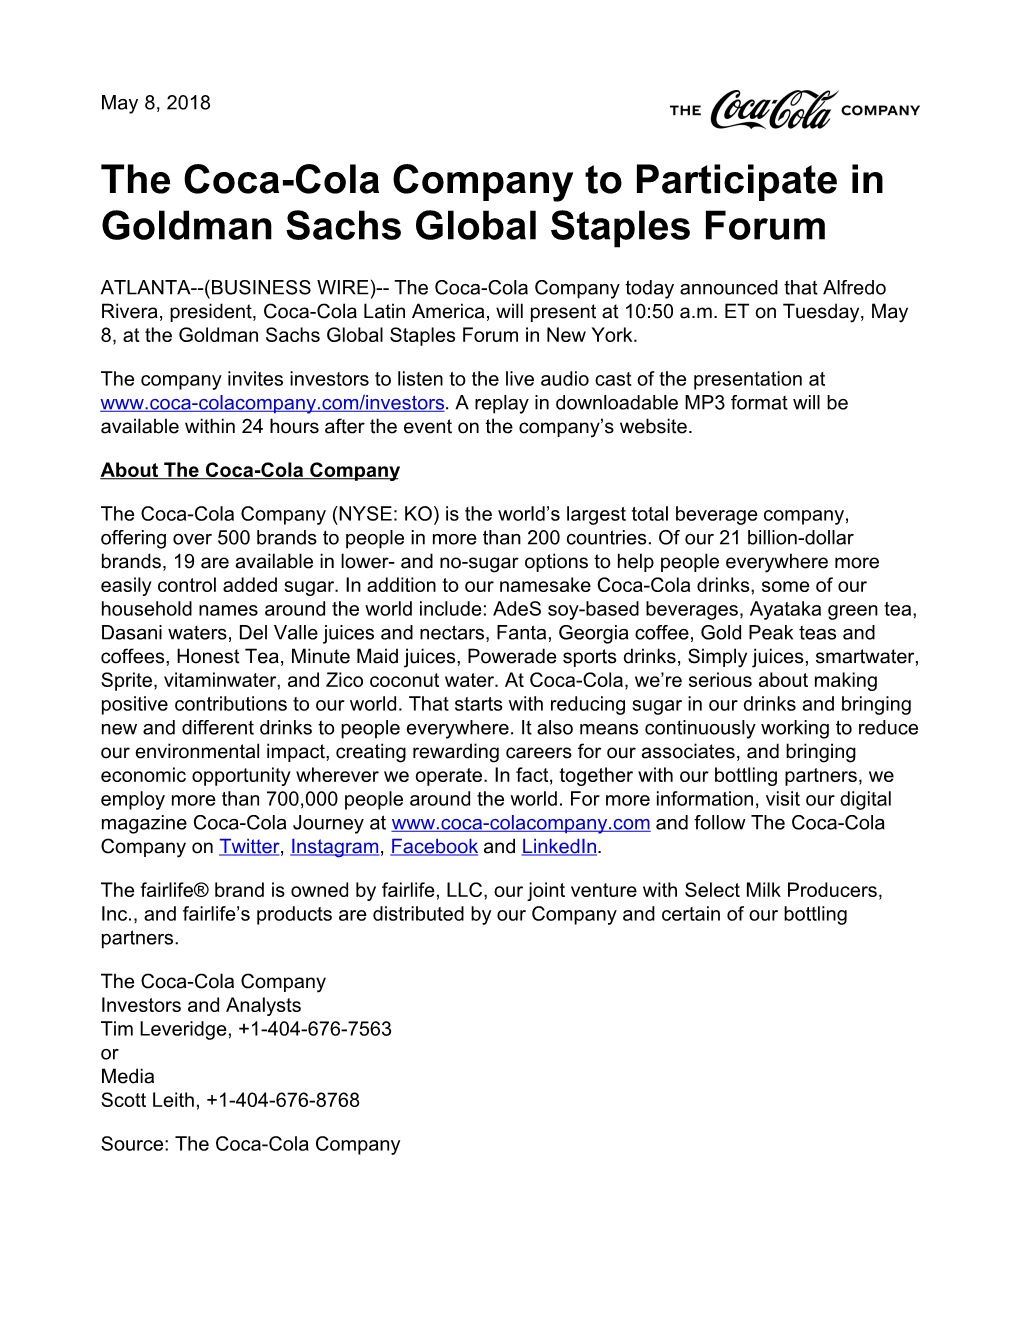 The Coca-Cola Company to Participate in Goldman Sachs Global Staples Forum